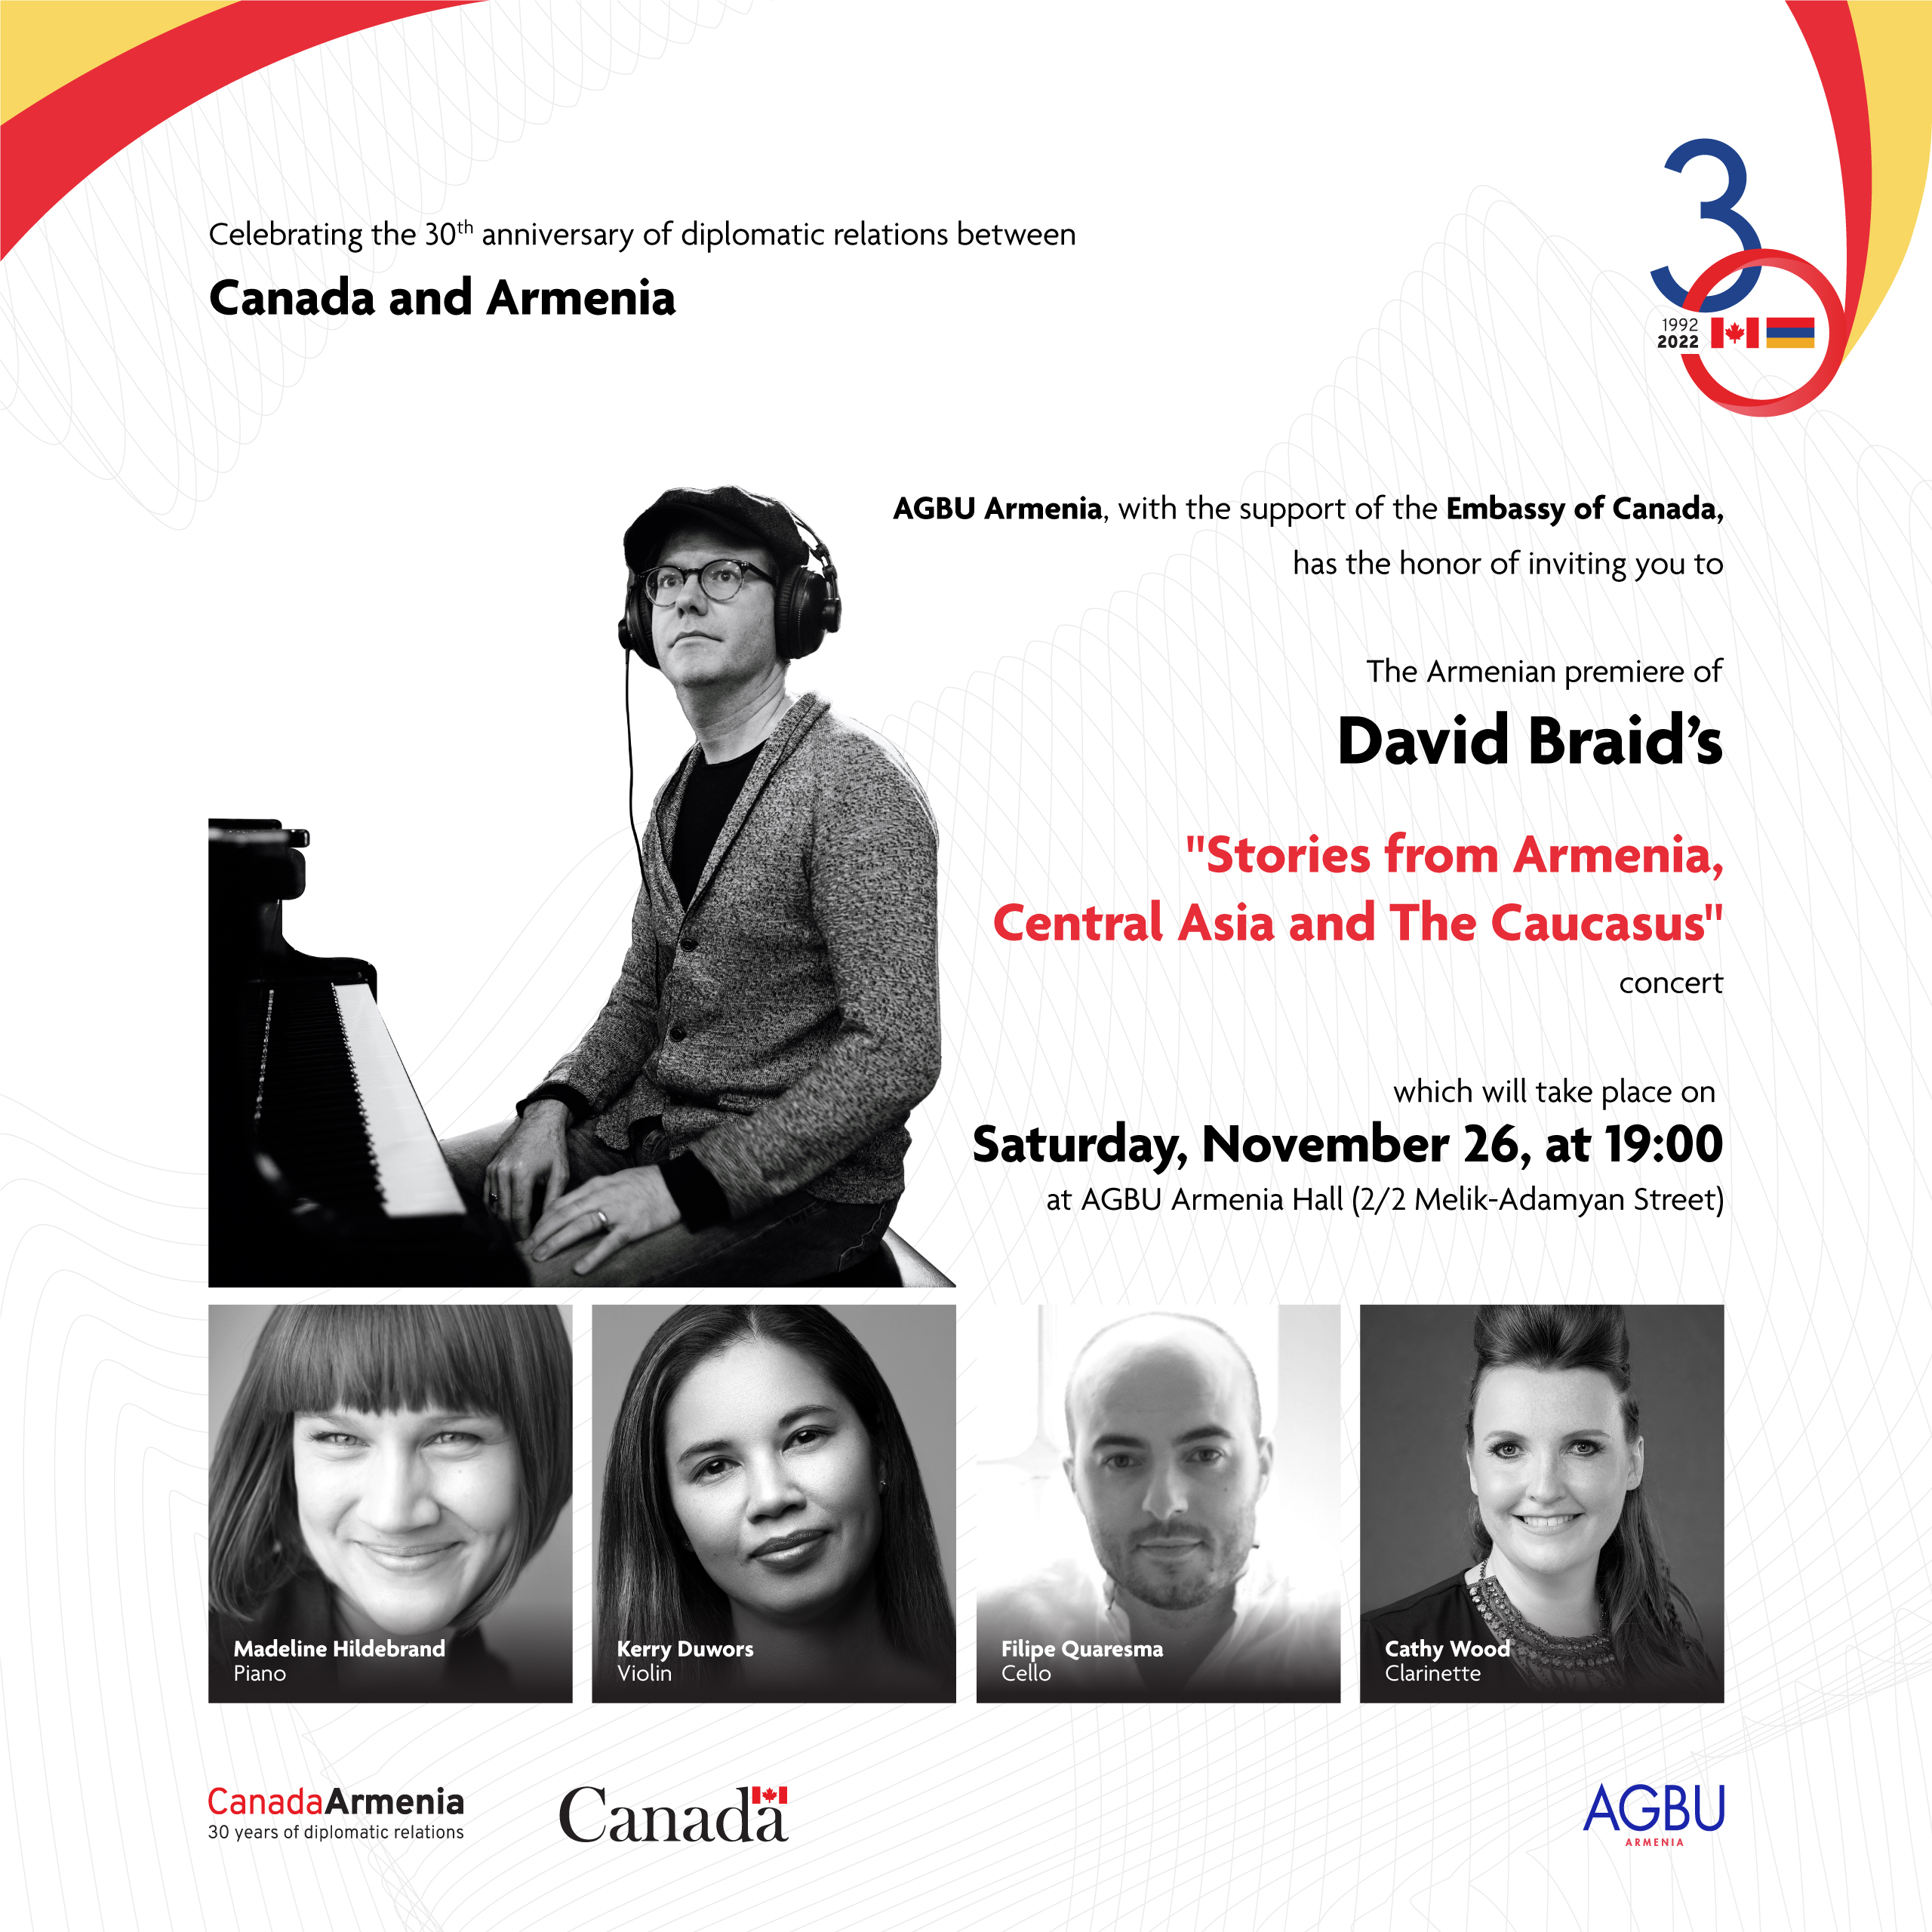 David Braid's "Stories from Armenia, Central Asia and the Caucasus" concert